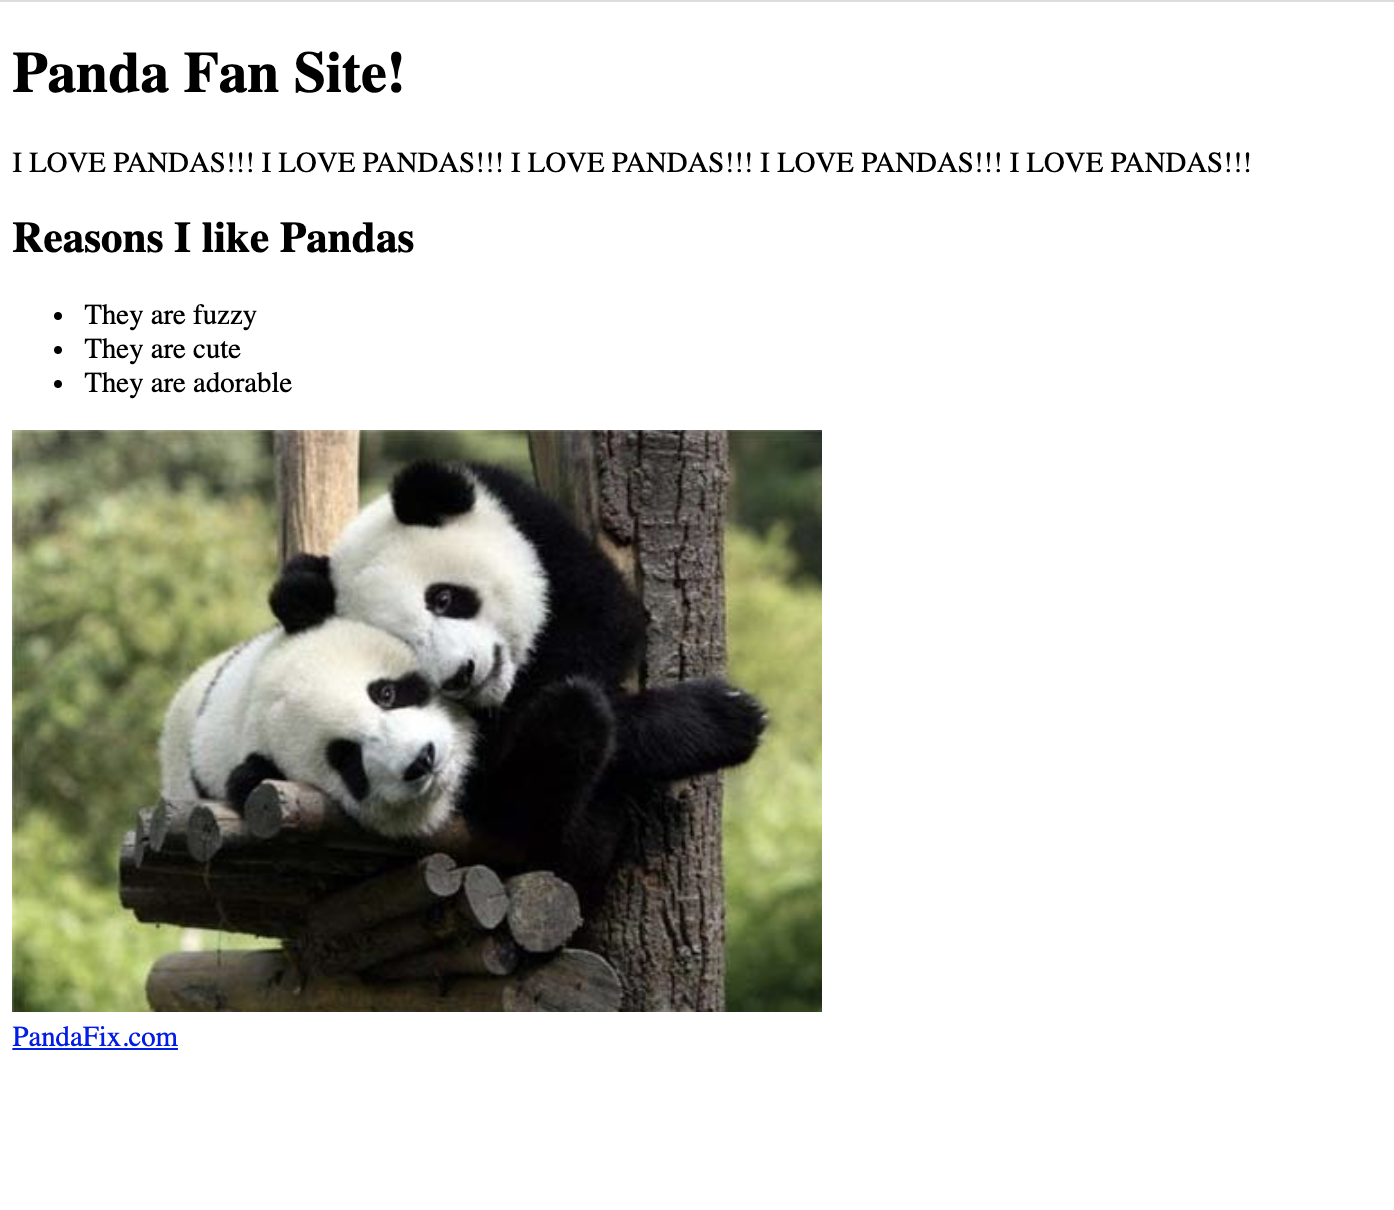 Image of Panda Web Site showing added text, image and a list.